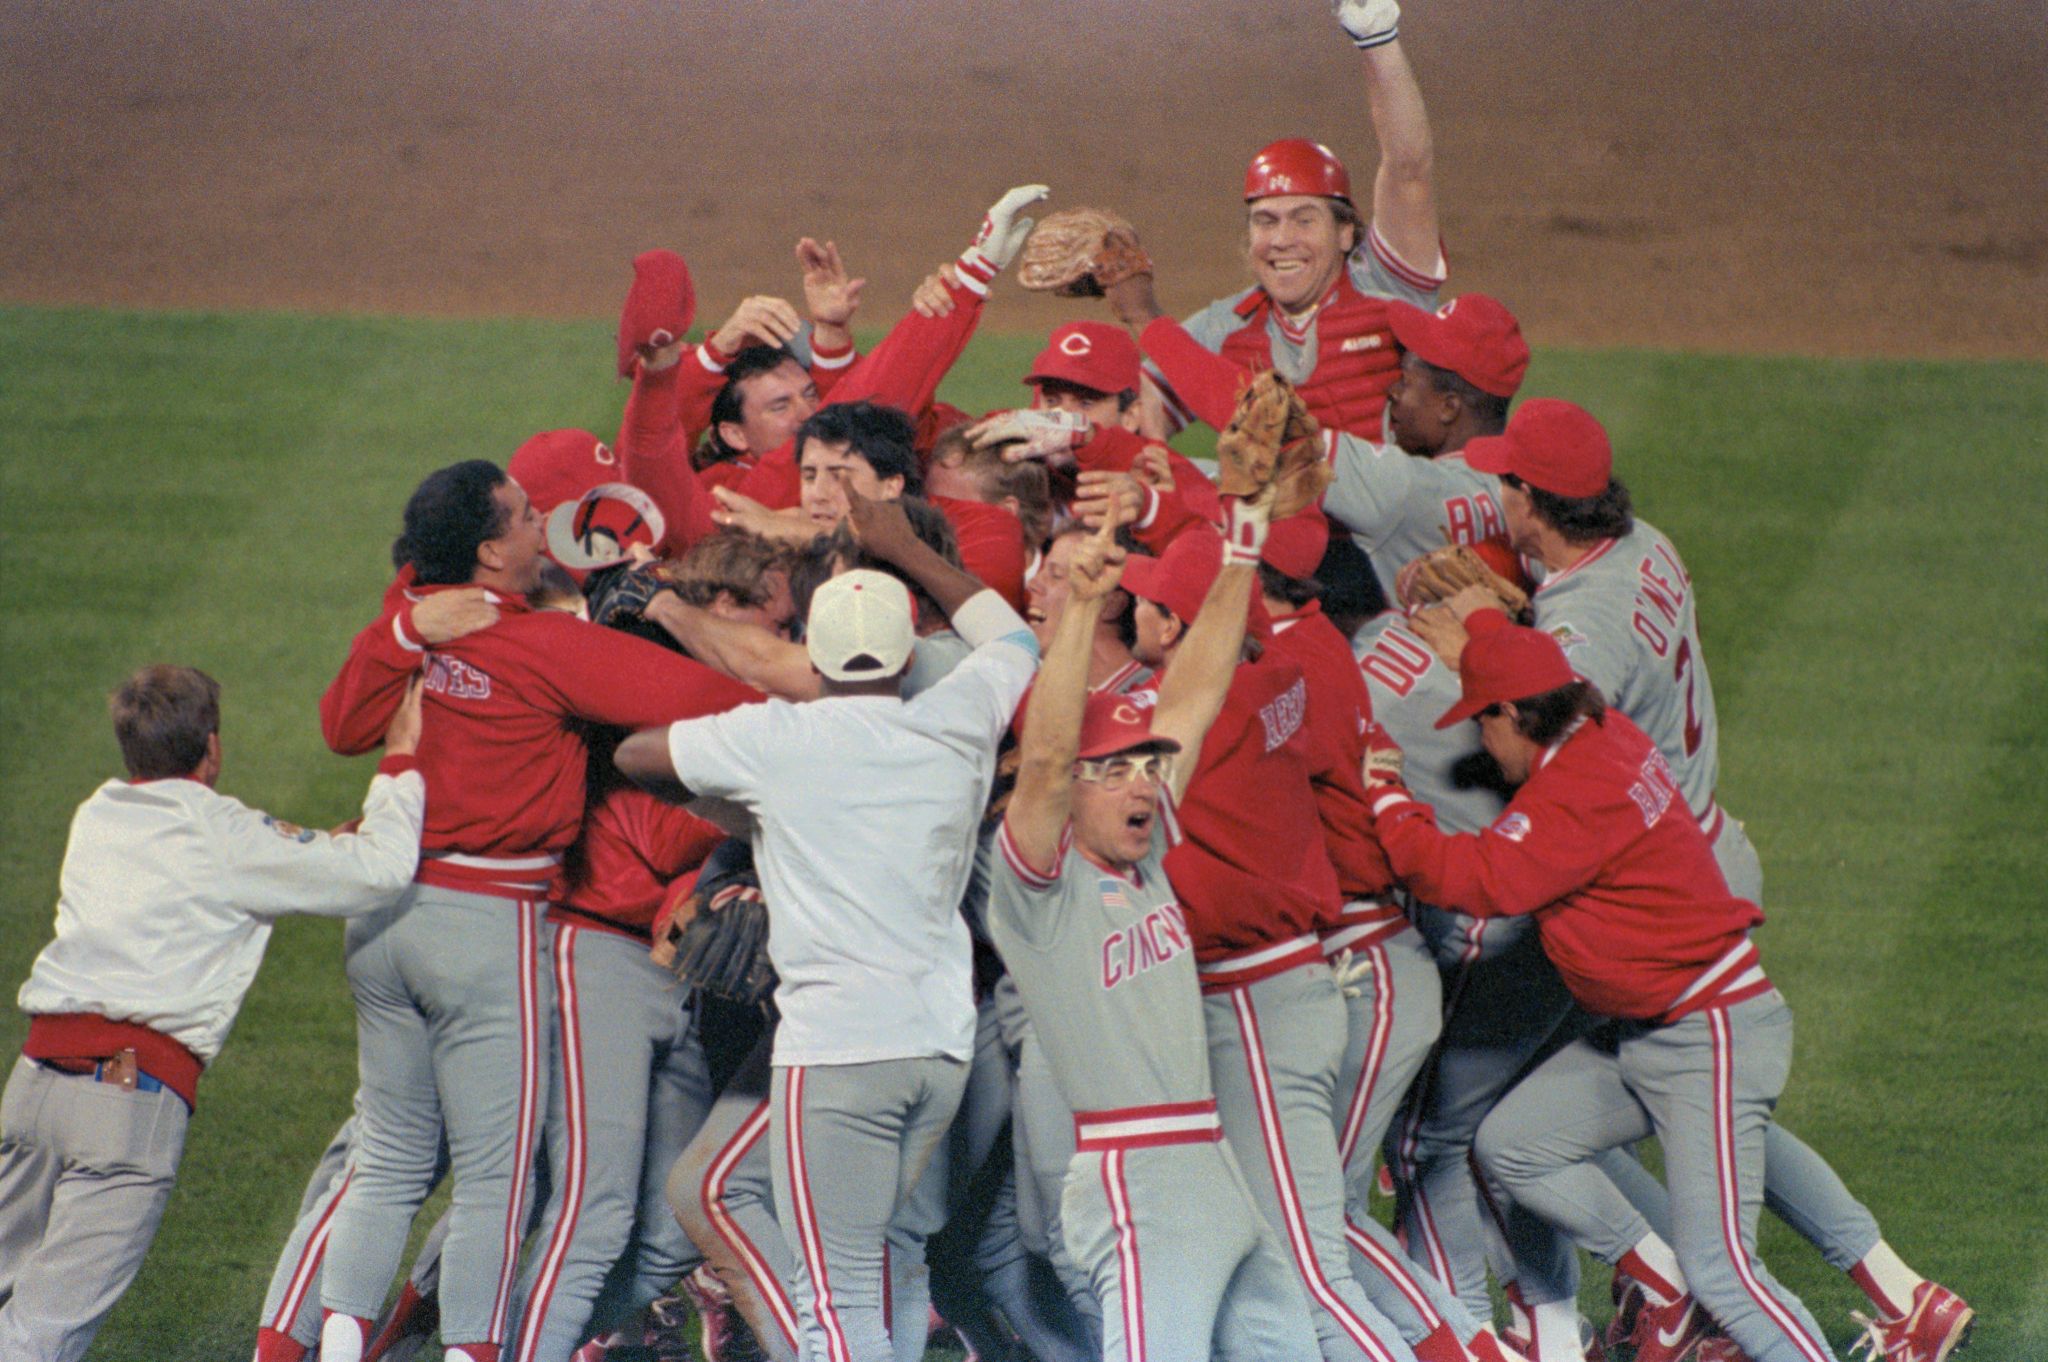 This World Series game 30 years ago marked the beginning of the